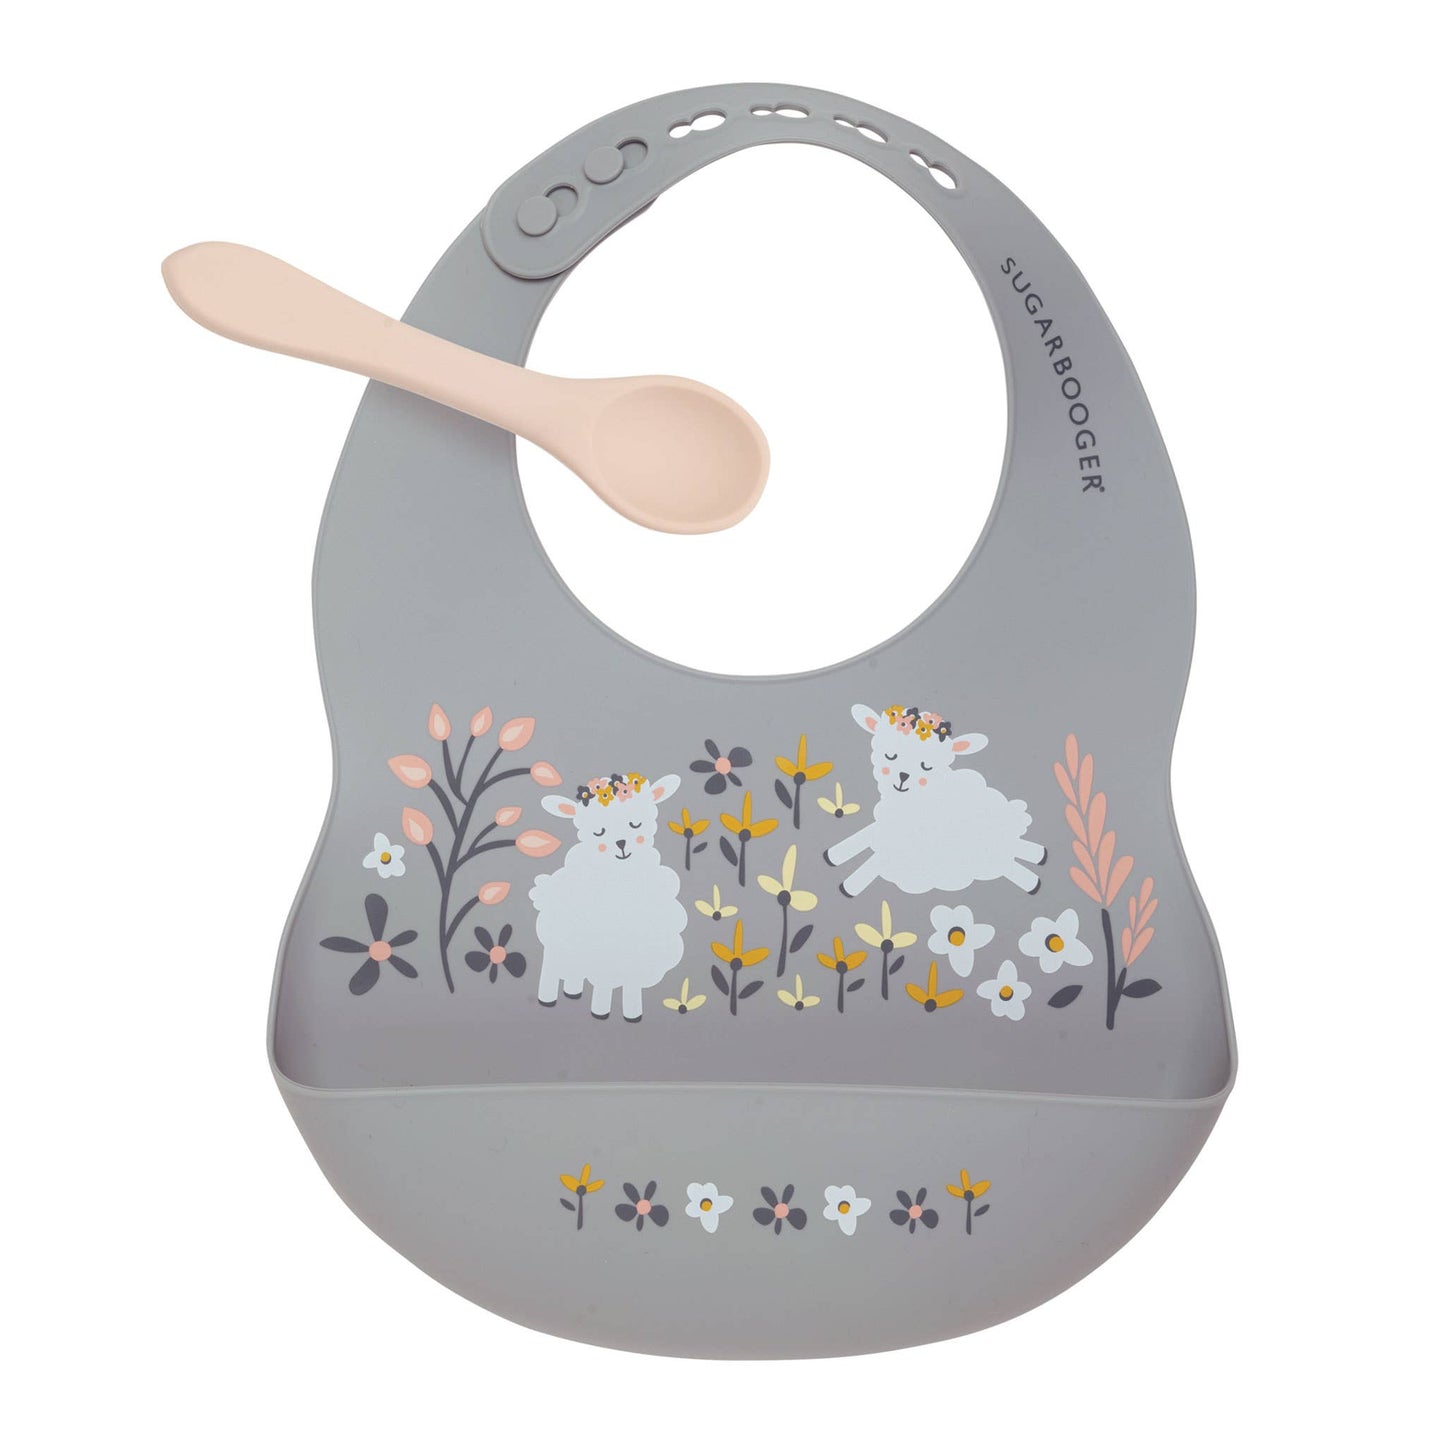 Sugarbooger by Ore’ Originals - Fresh & Messy Silicone Bib & Spoon Set | Lily the Lamb